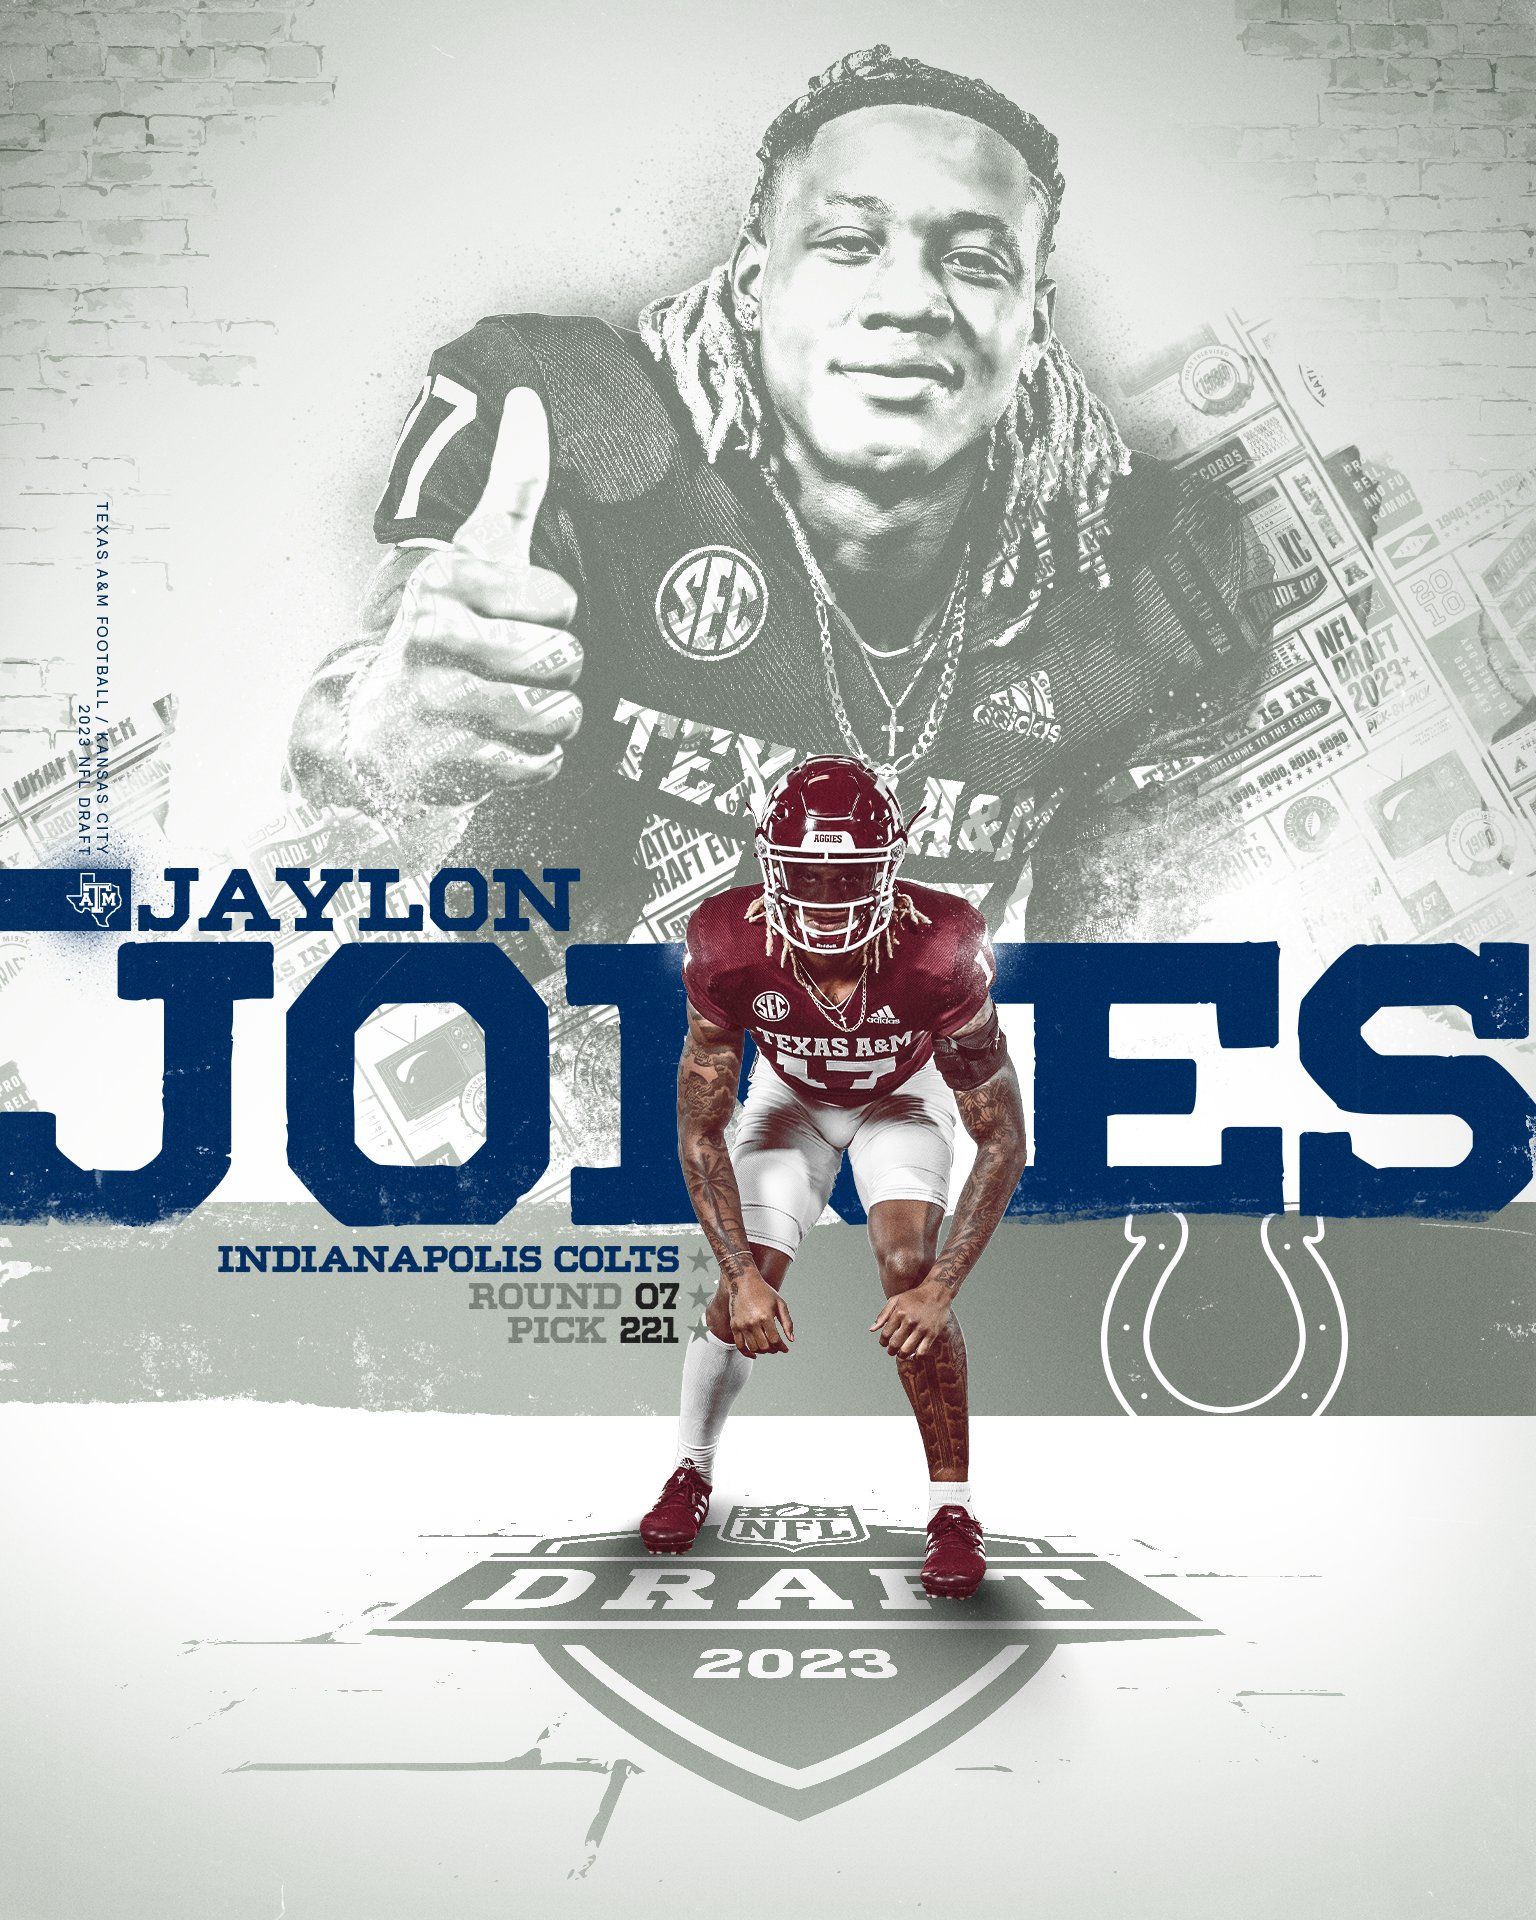 Texas A&M Football on X: 'From Aggieland to Indianapolis! @OriginalJaylon →  @Colts #GigEm x #ForTheShoe  / X